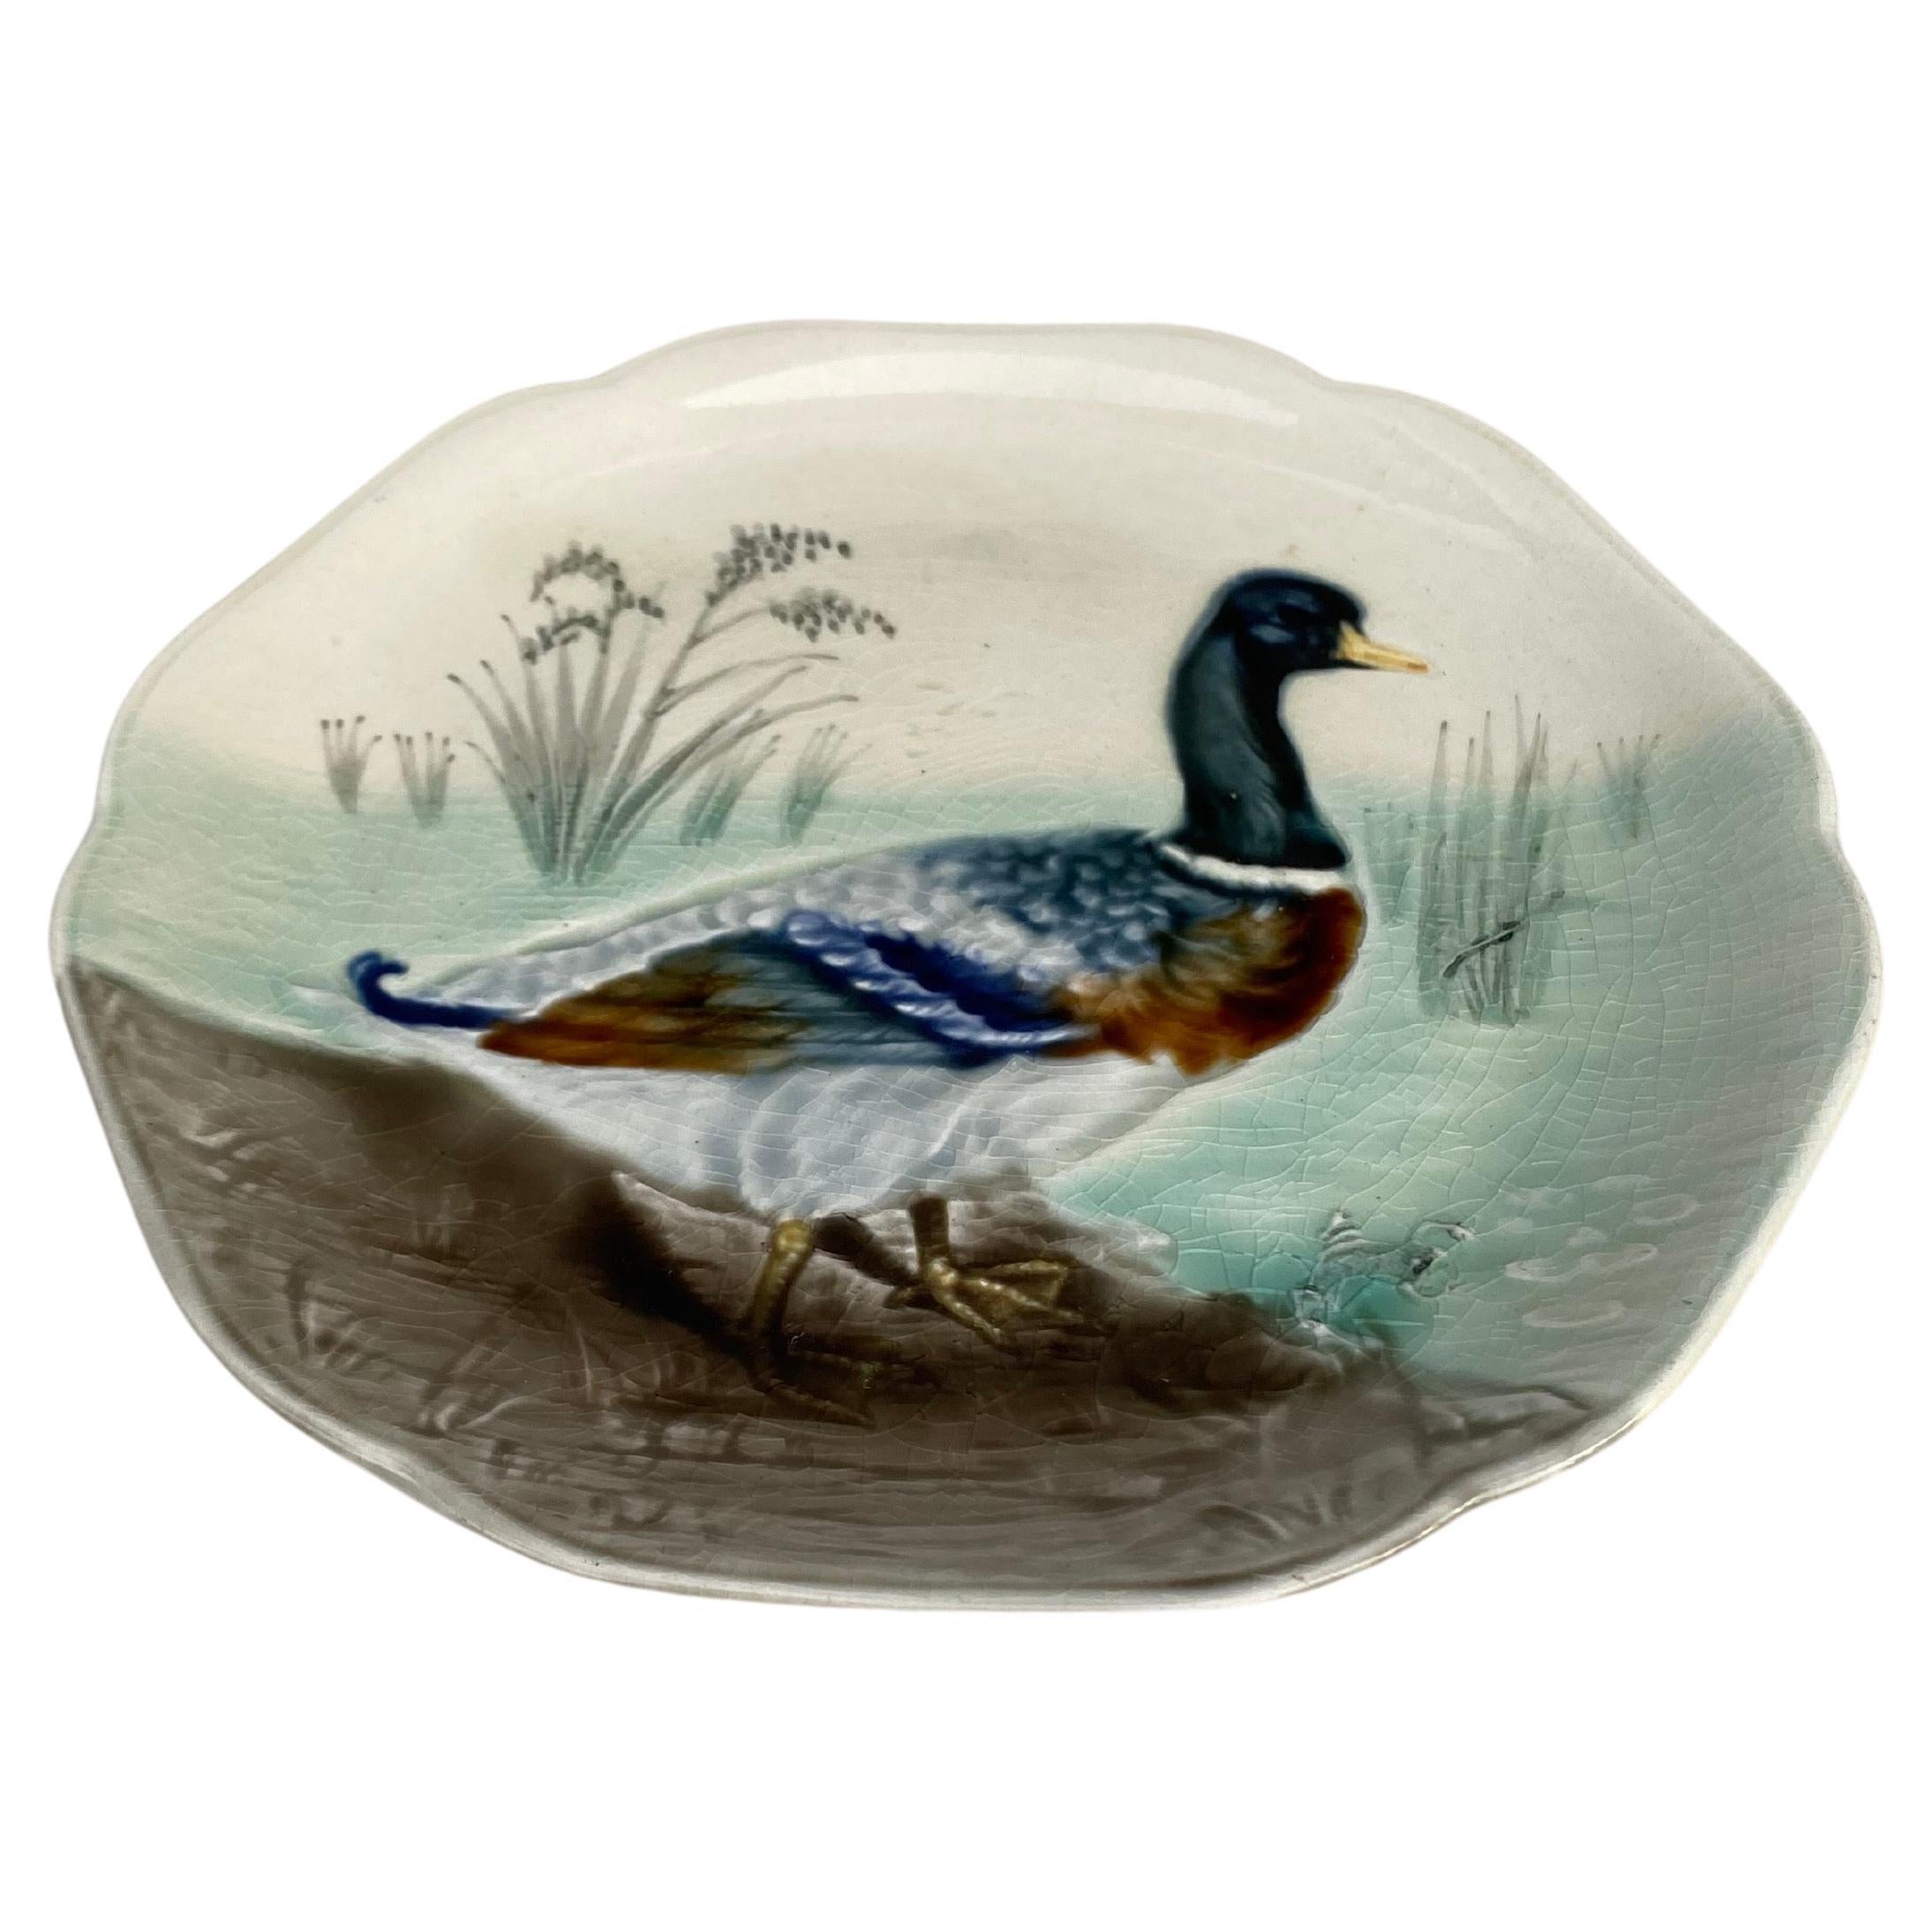 19th century Majolica Mallard Duck Plate Hippolyte Boulenger Choisy le Roi, circa 1890.
The manufacture of Choisy le Roi was one of the most important manufacture at the end of 19th century, they produced very high quality ceramics of all kinds as